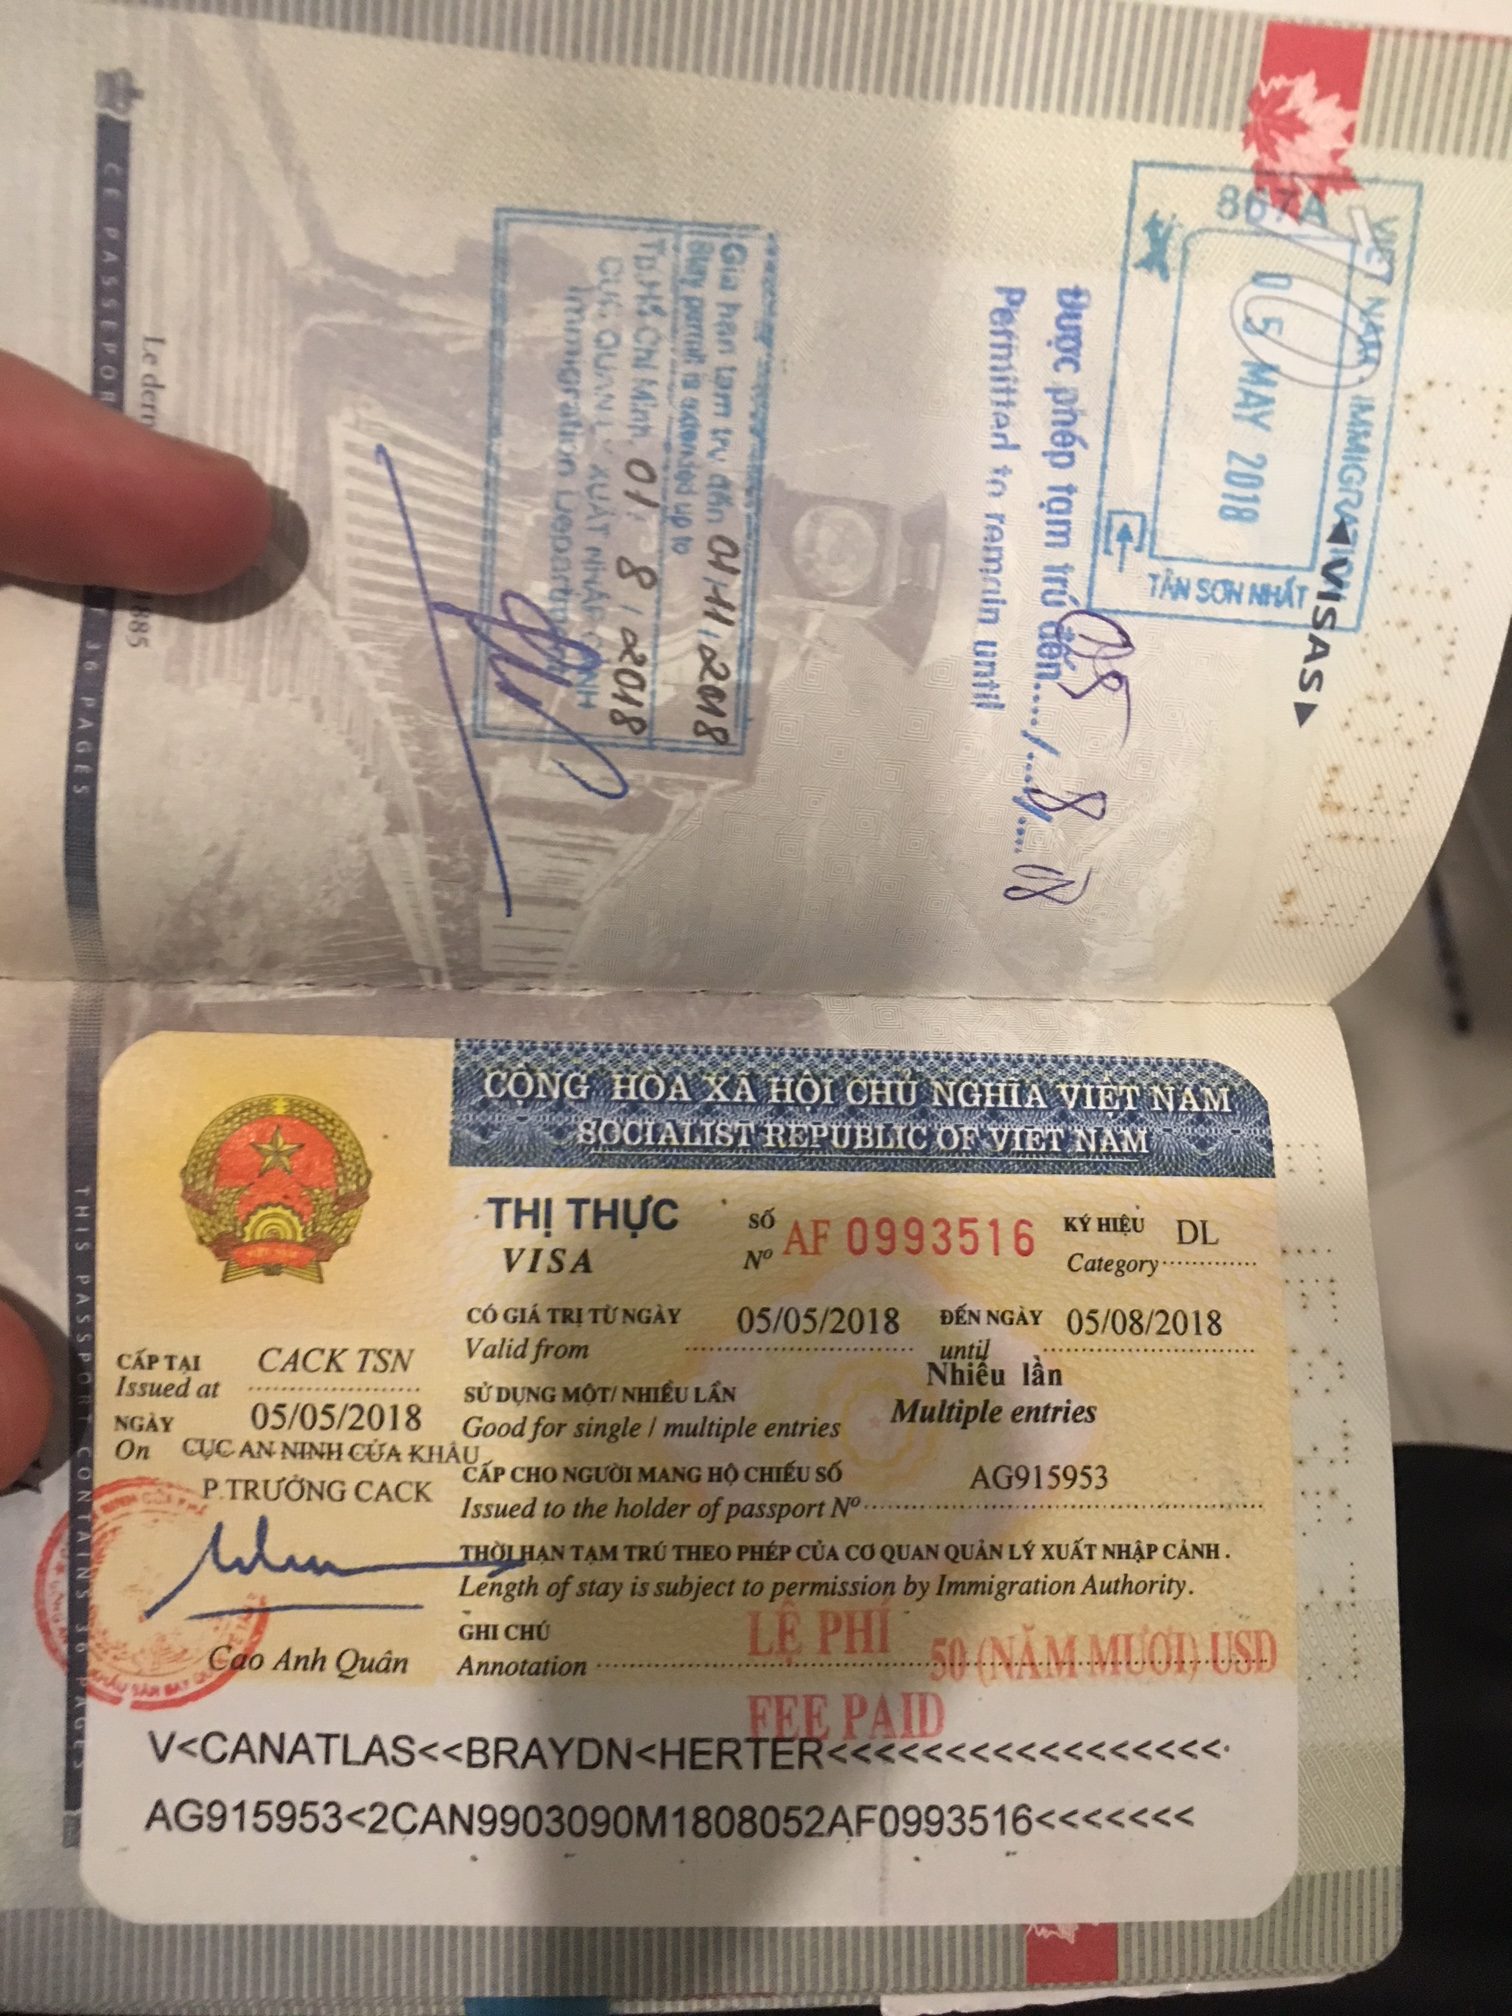 How To Get 1 Month Multiple Entry Tourist Visa For Travelling To Vietnam ?